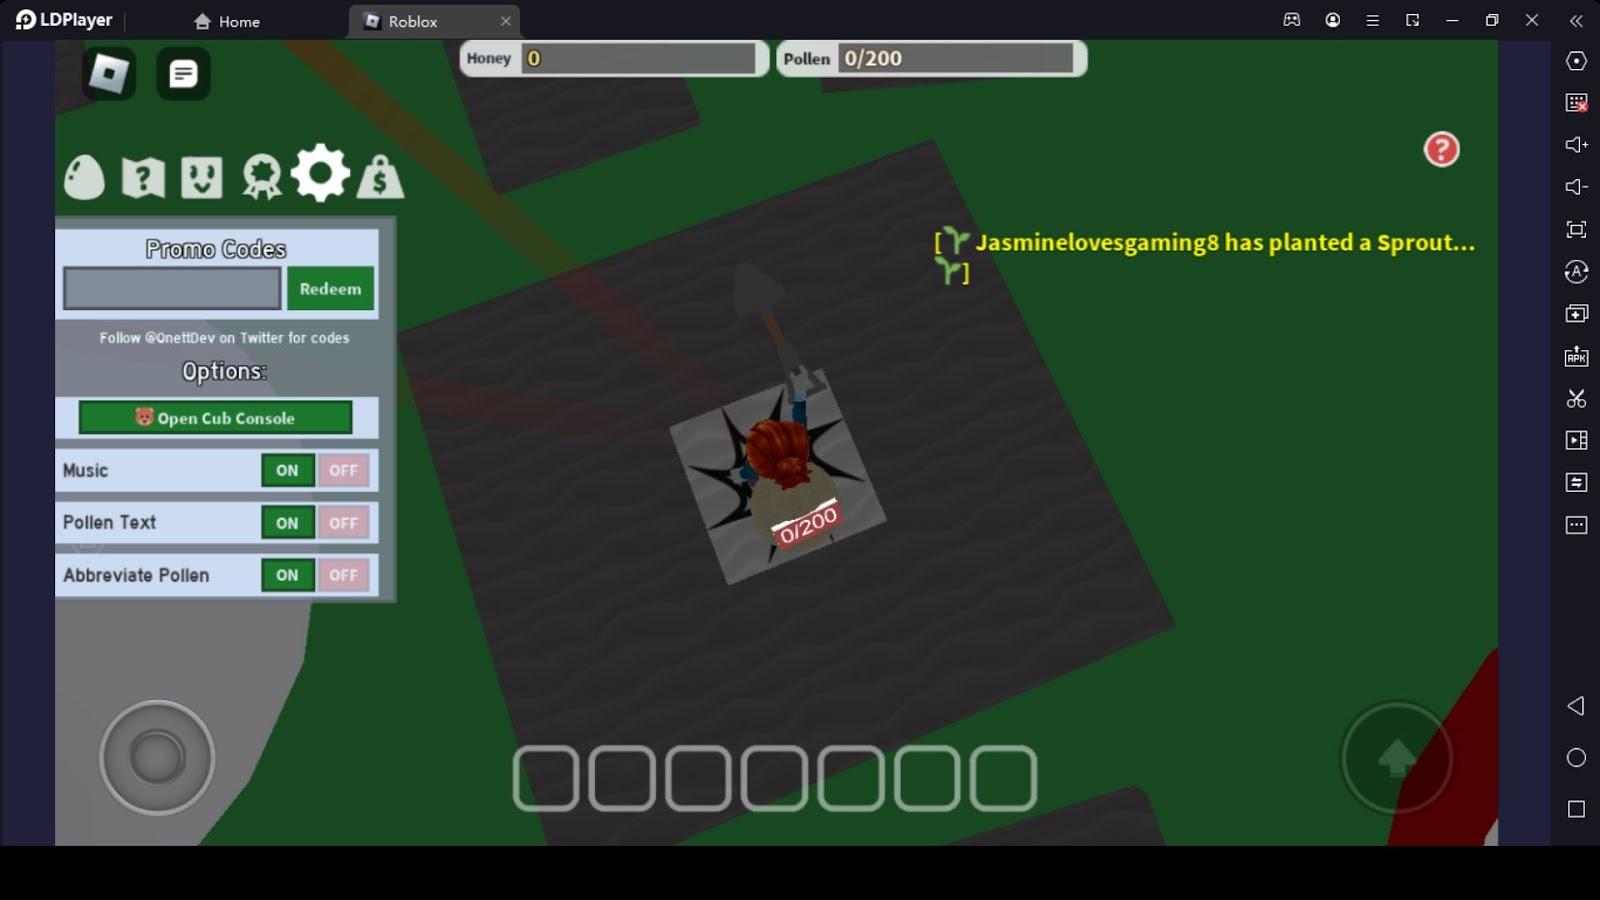 Roblox Bee Swarm Simulator codes (December 2023) – How to get free